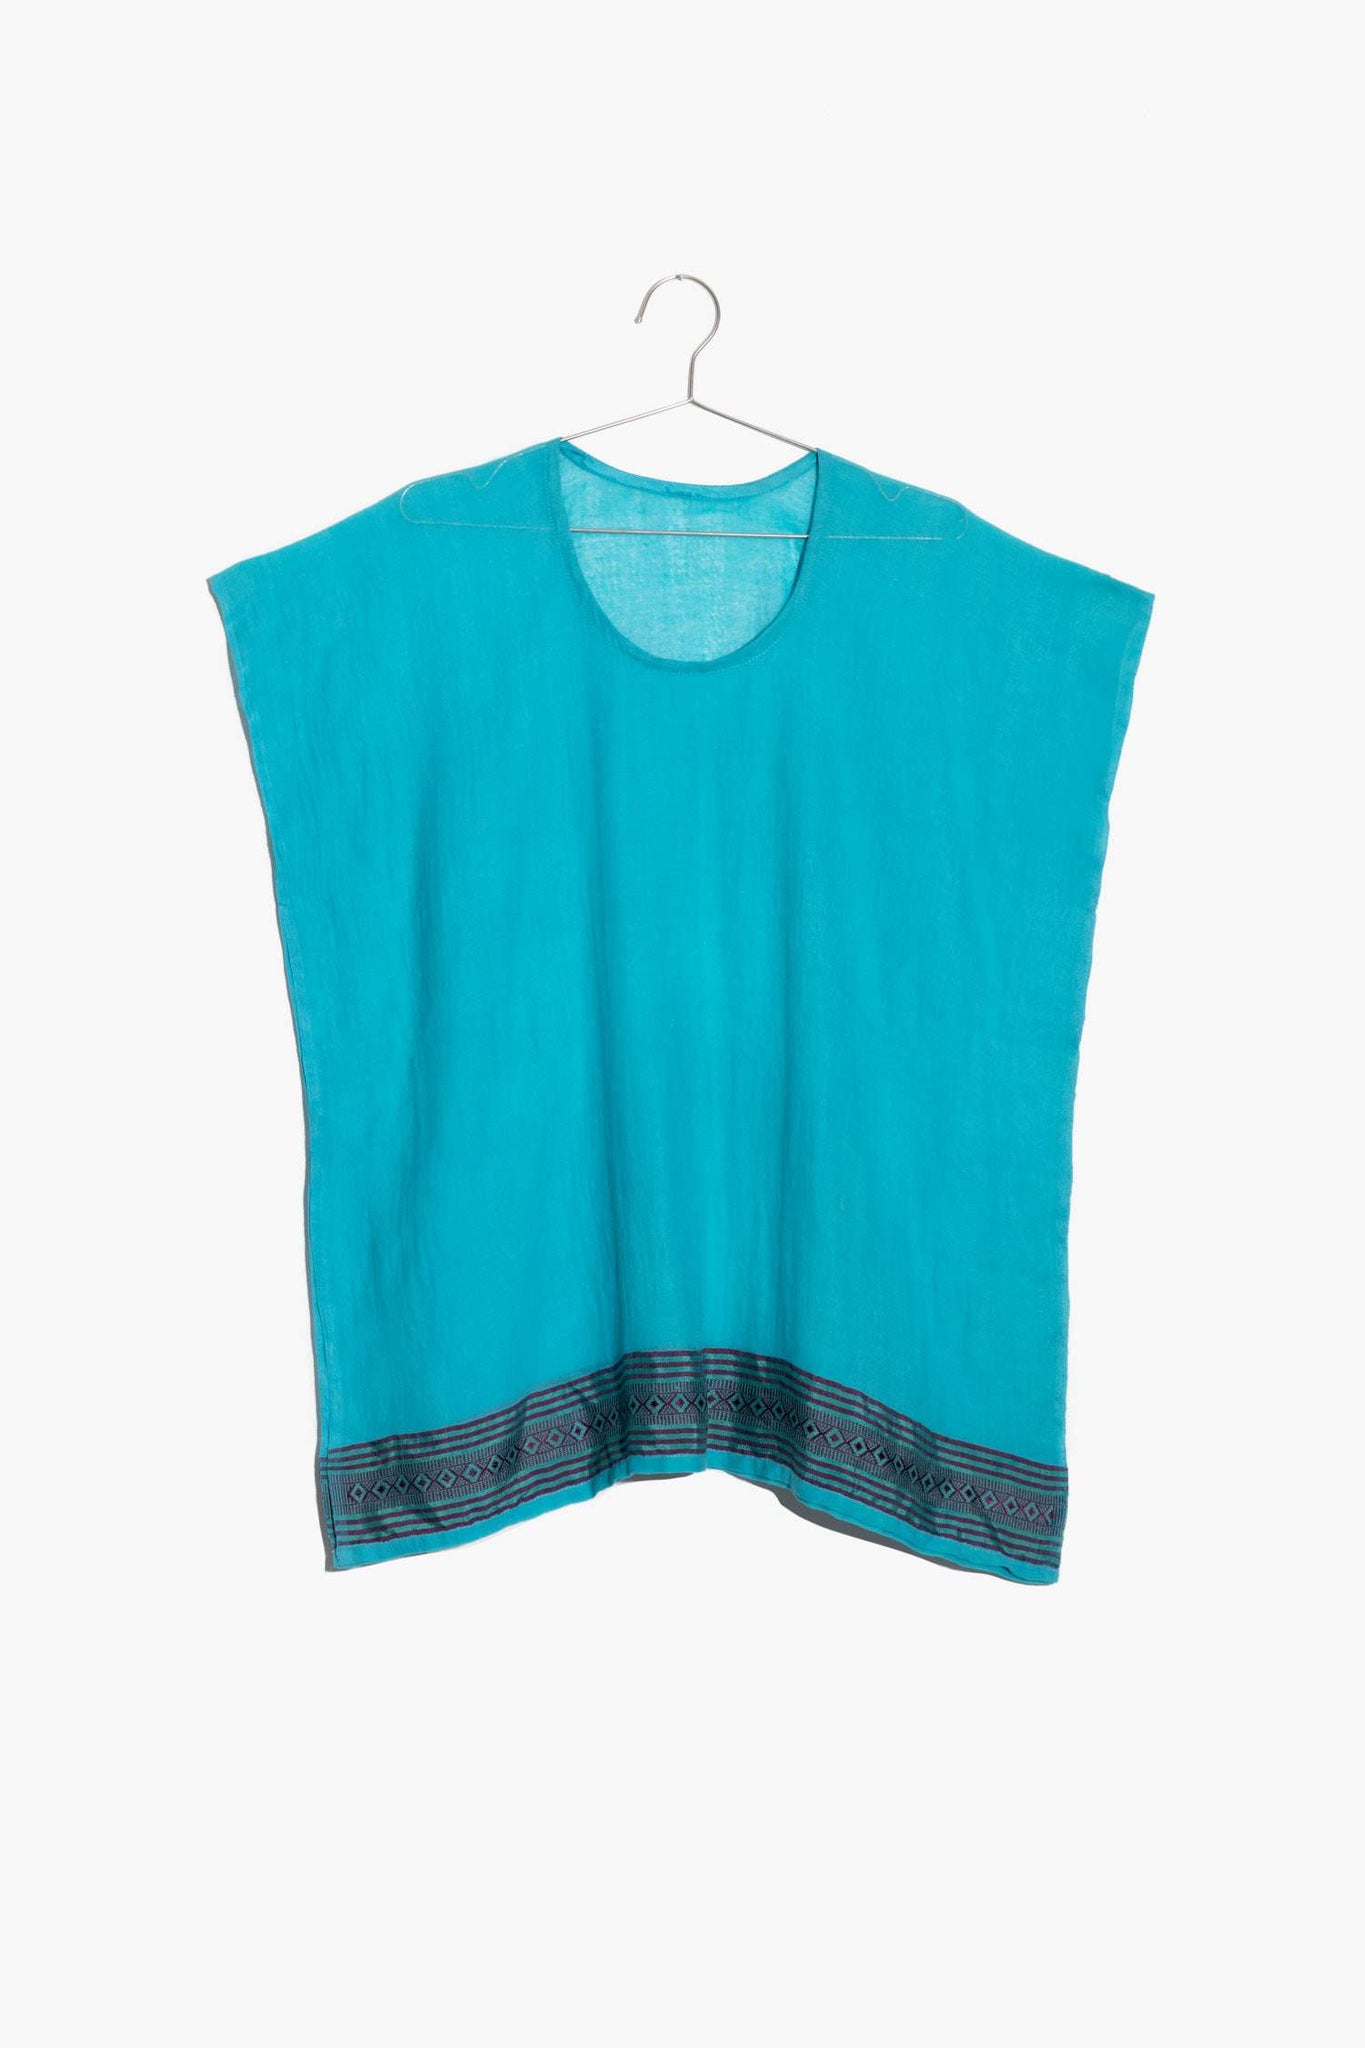 The Mimi Top is like your oversized tee but better. This semi-sheer cotton top is comfy without sacrificing style. It features a rich pattern along the bottom hem, inspired by Ethiopian textile design.